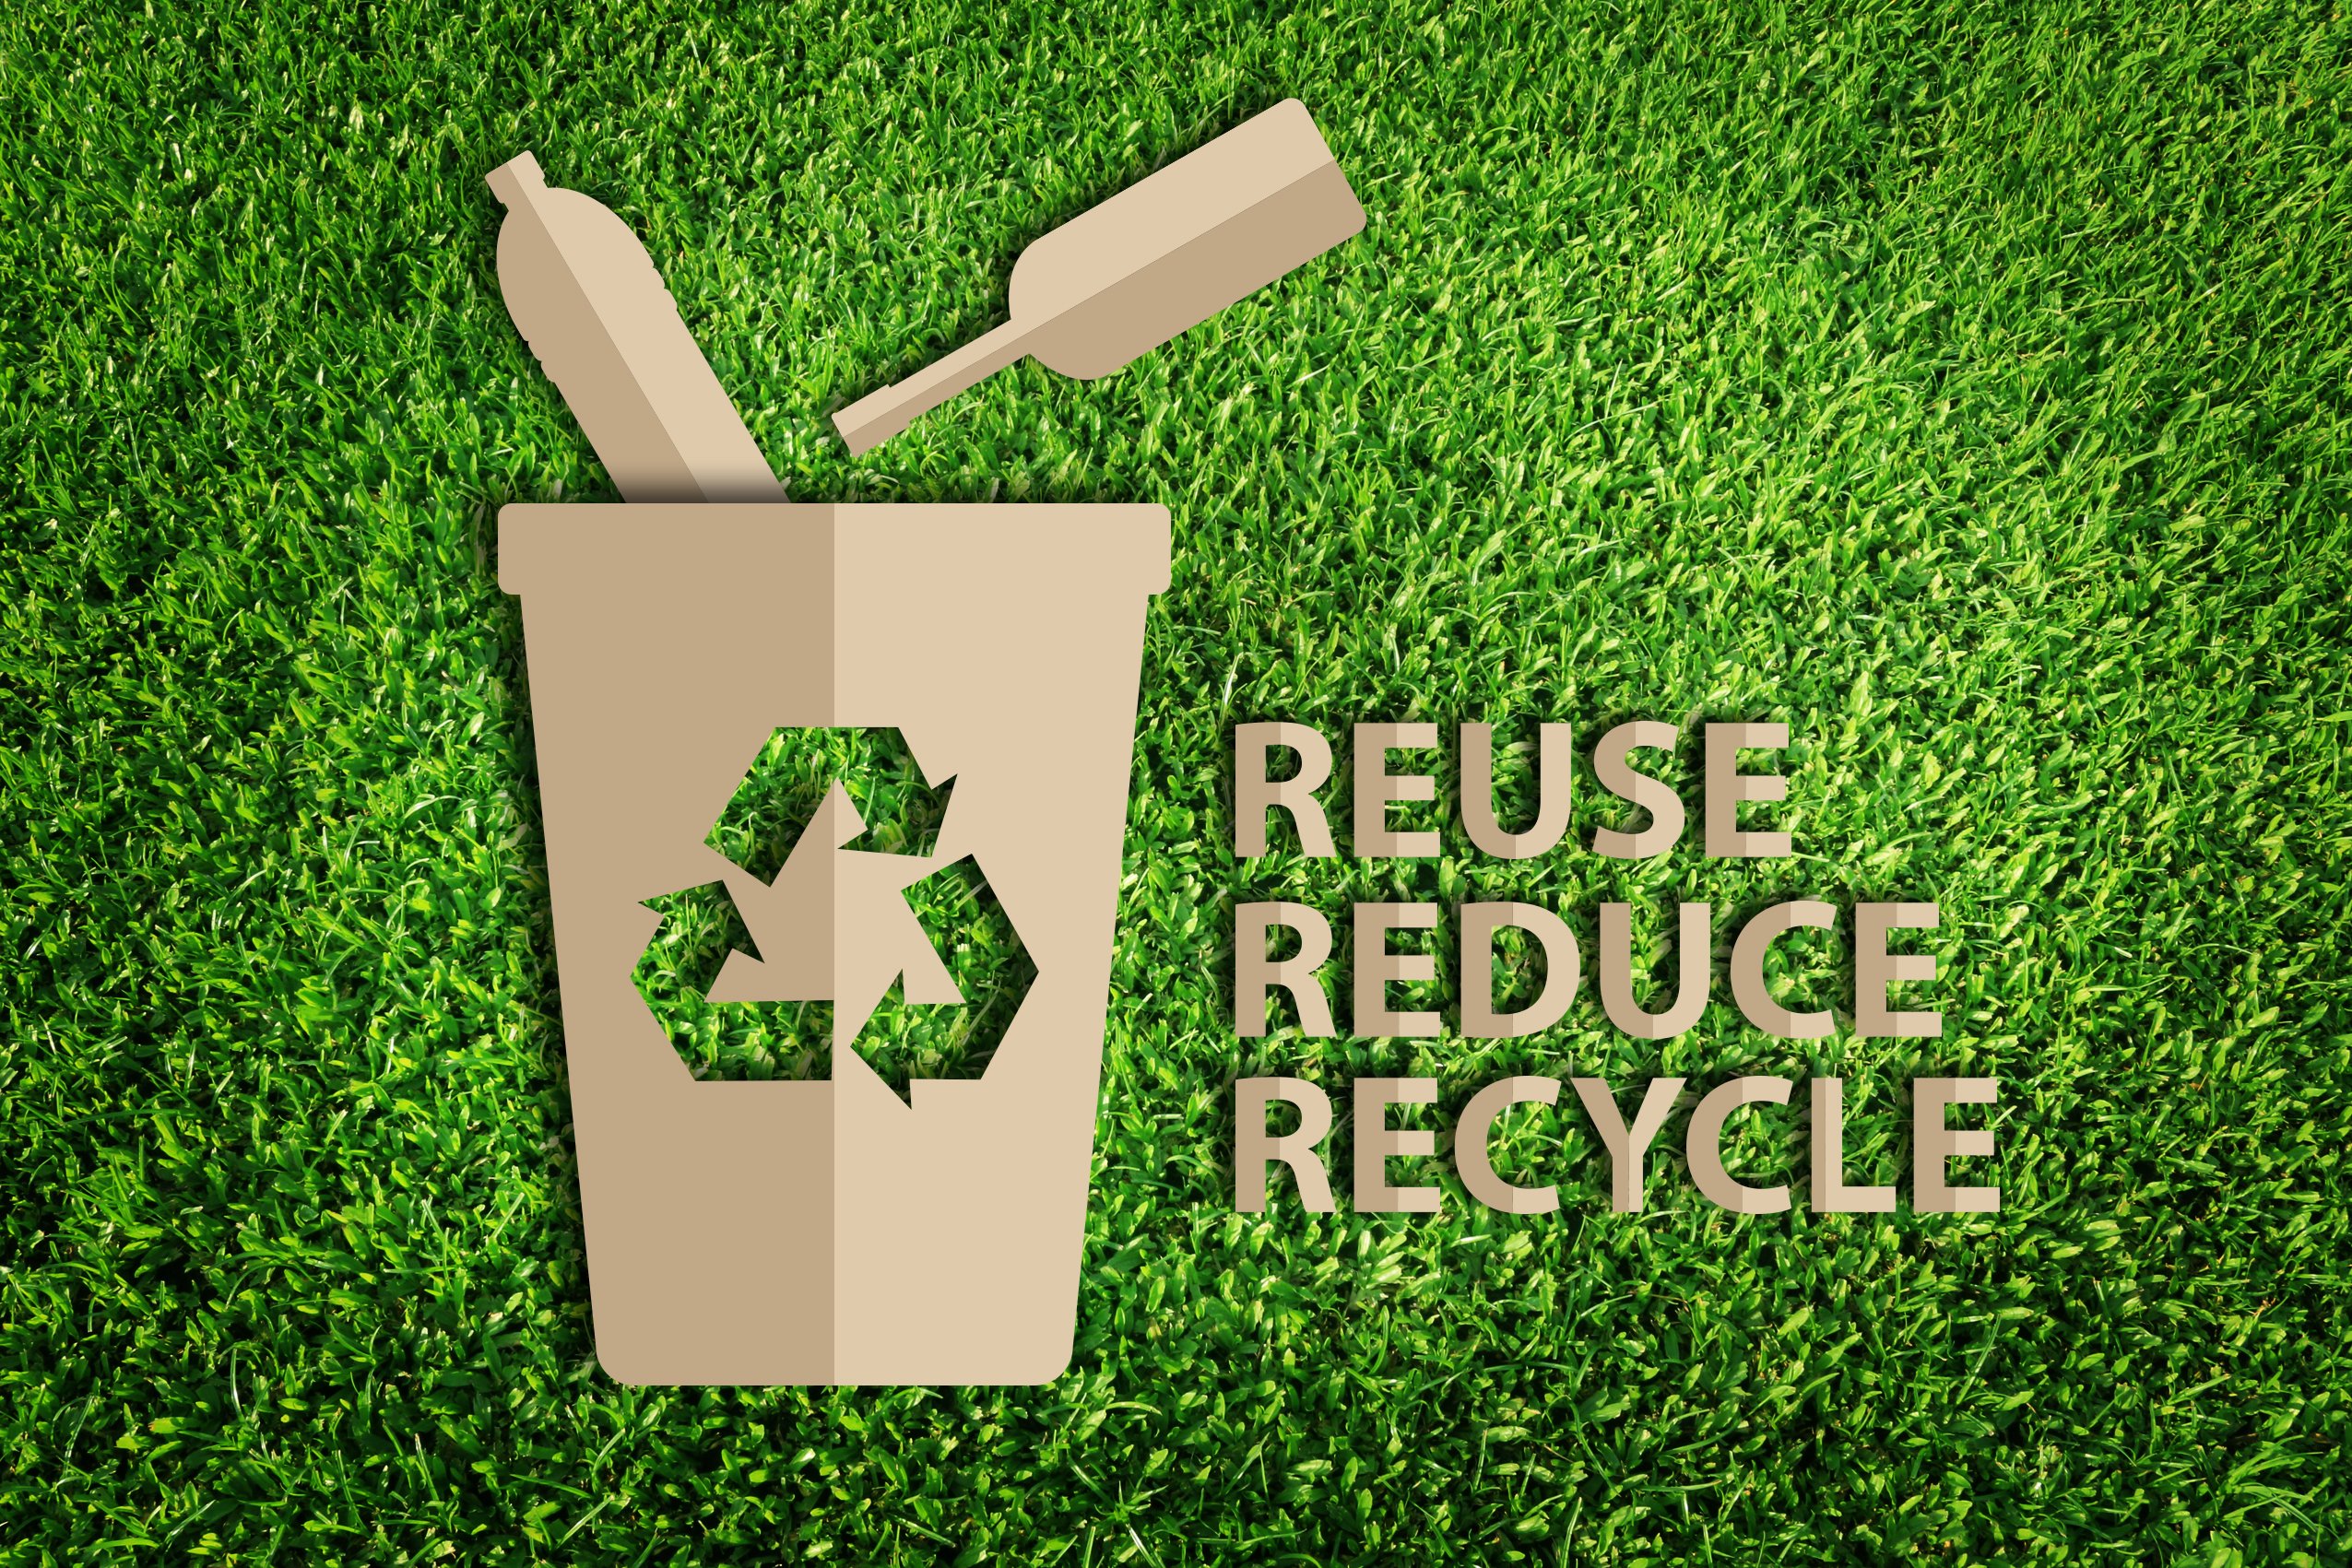 Reduce mean. Reduce reuse recycle. Знак reduce reuse recycle. 3 RS reduce recycle reuse. Концепция 3r reduce reuse recycle.